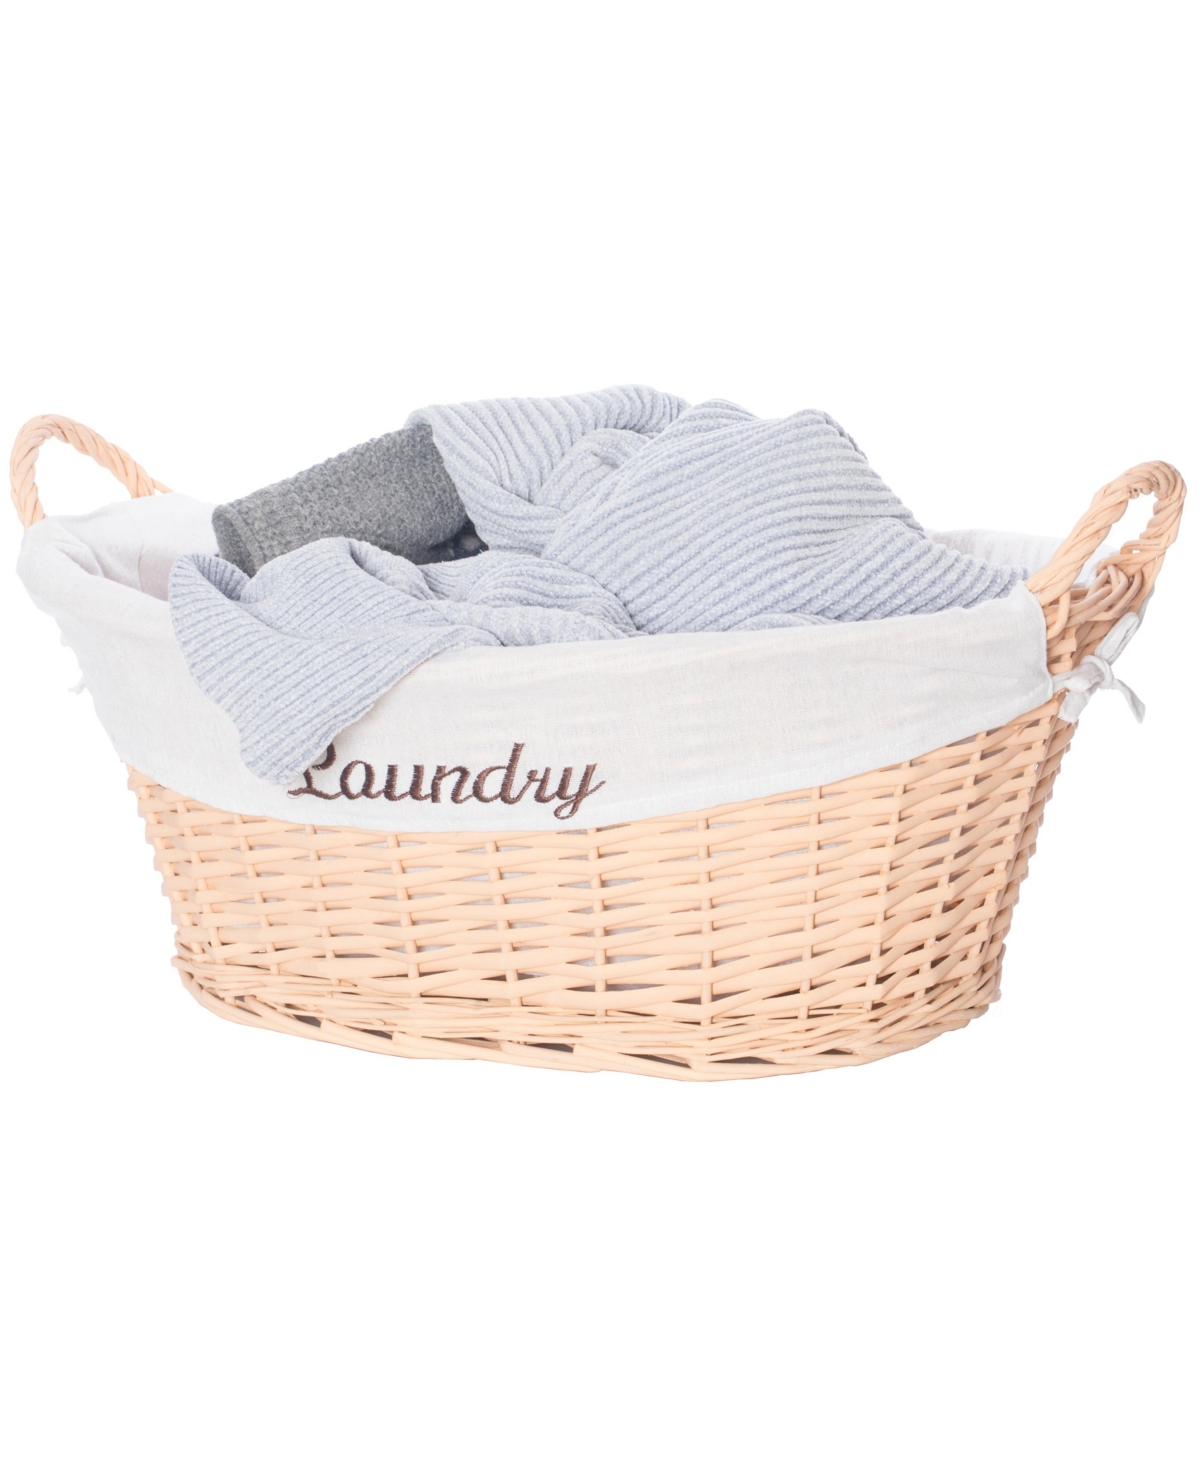 Willow Laundry Hamper Basket with Liner and Side Handles - Natural